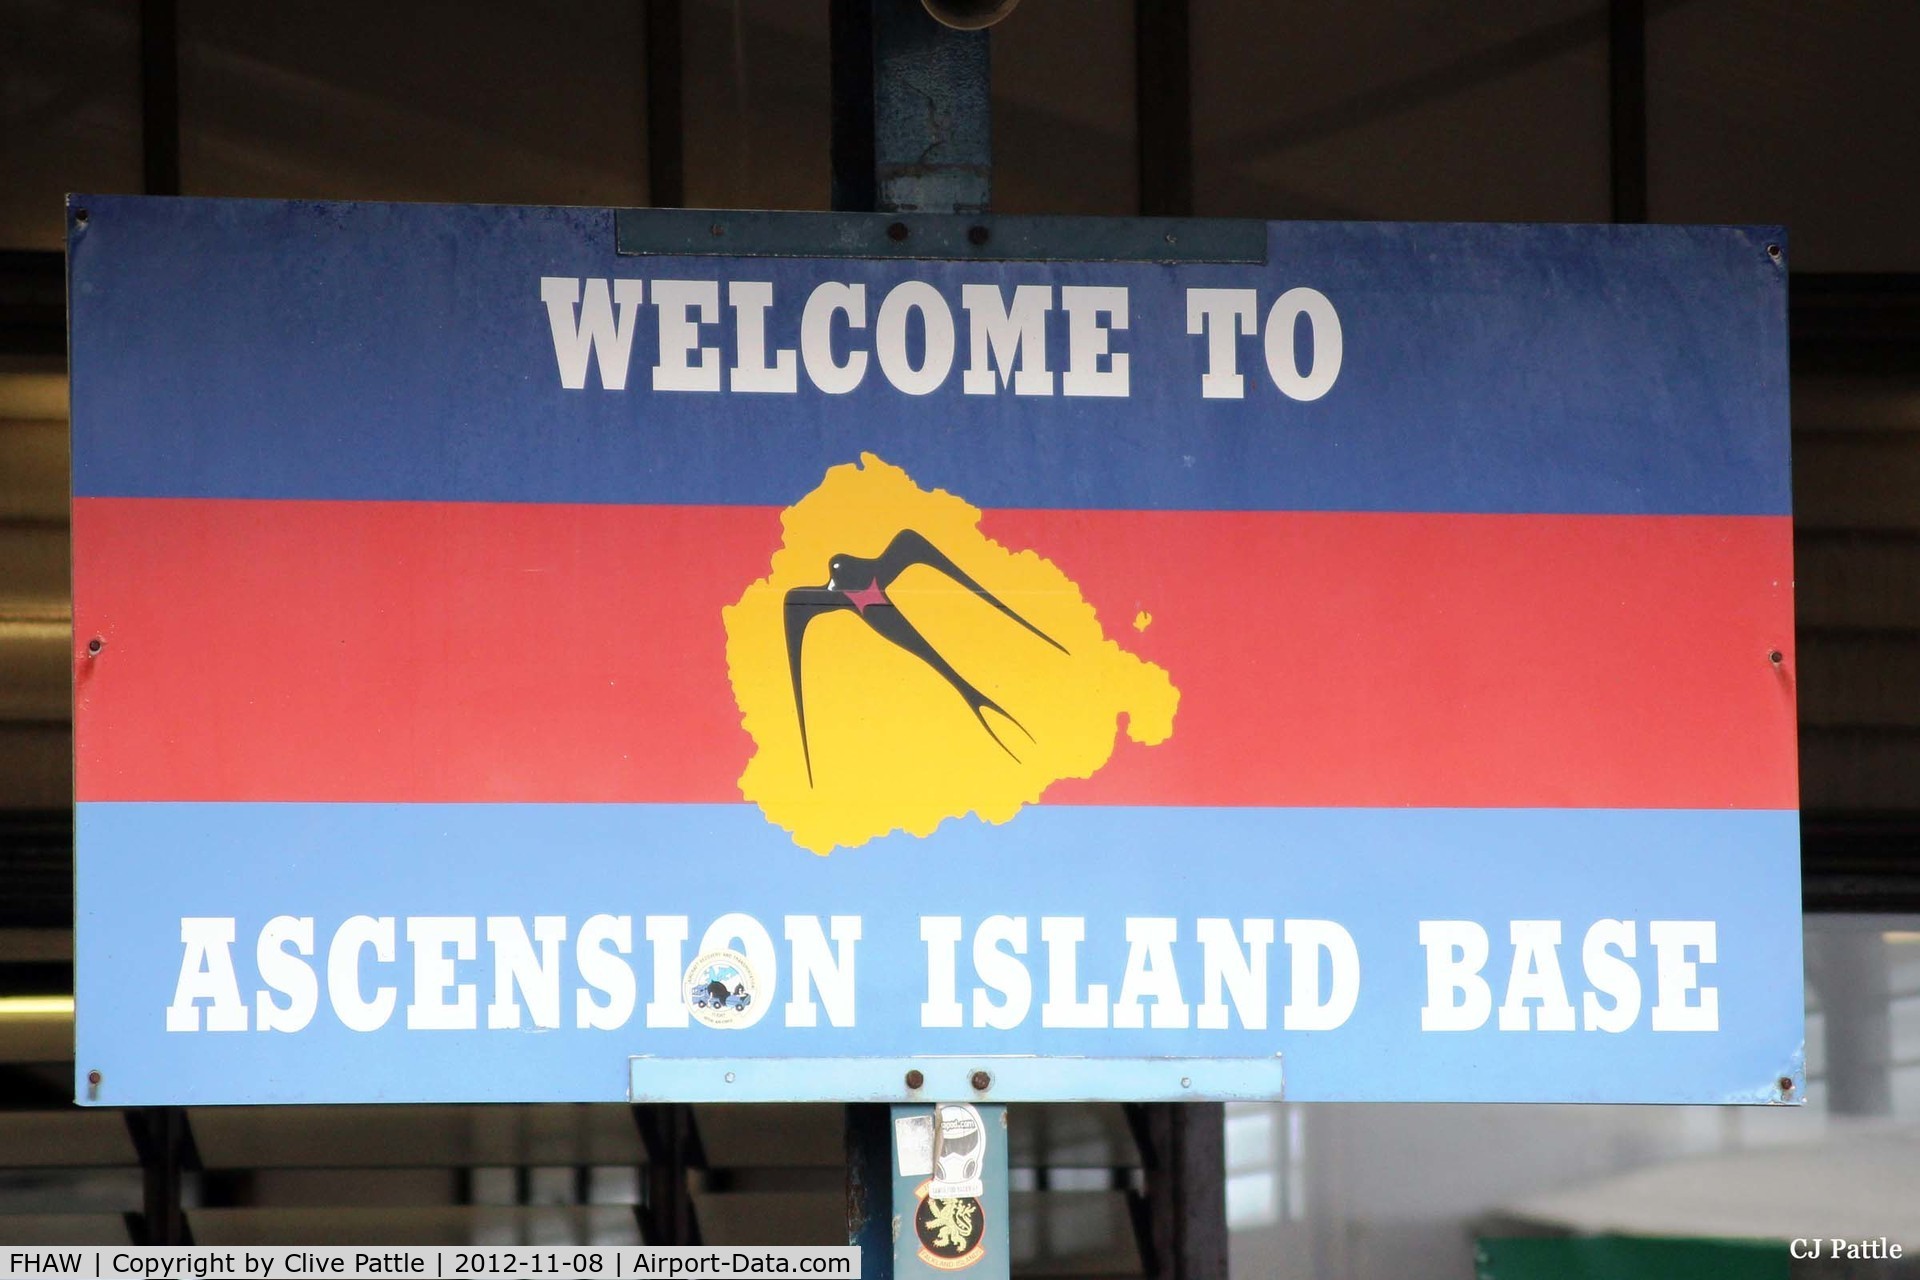 FHAW Airport - A Welcome sign at Ascension Island - Wideawake airfield FHAW